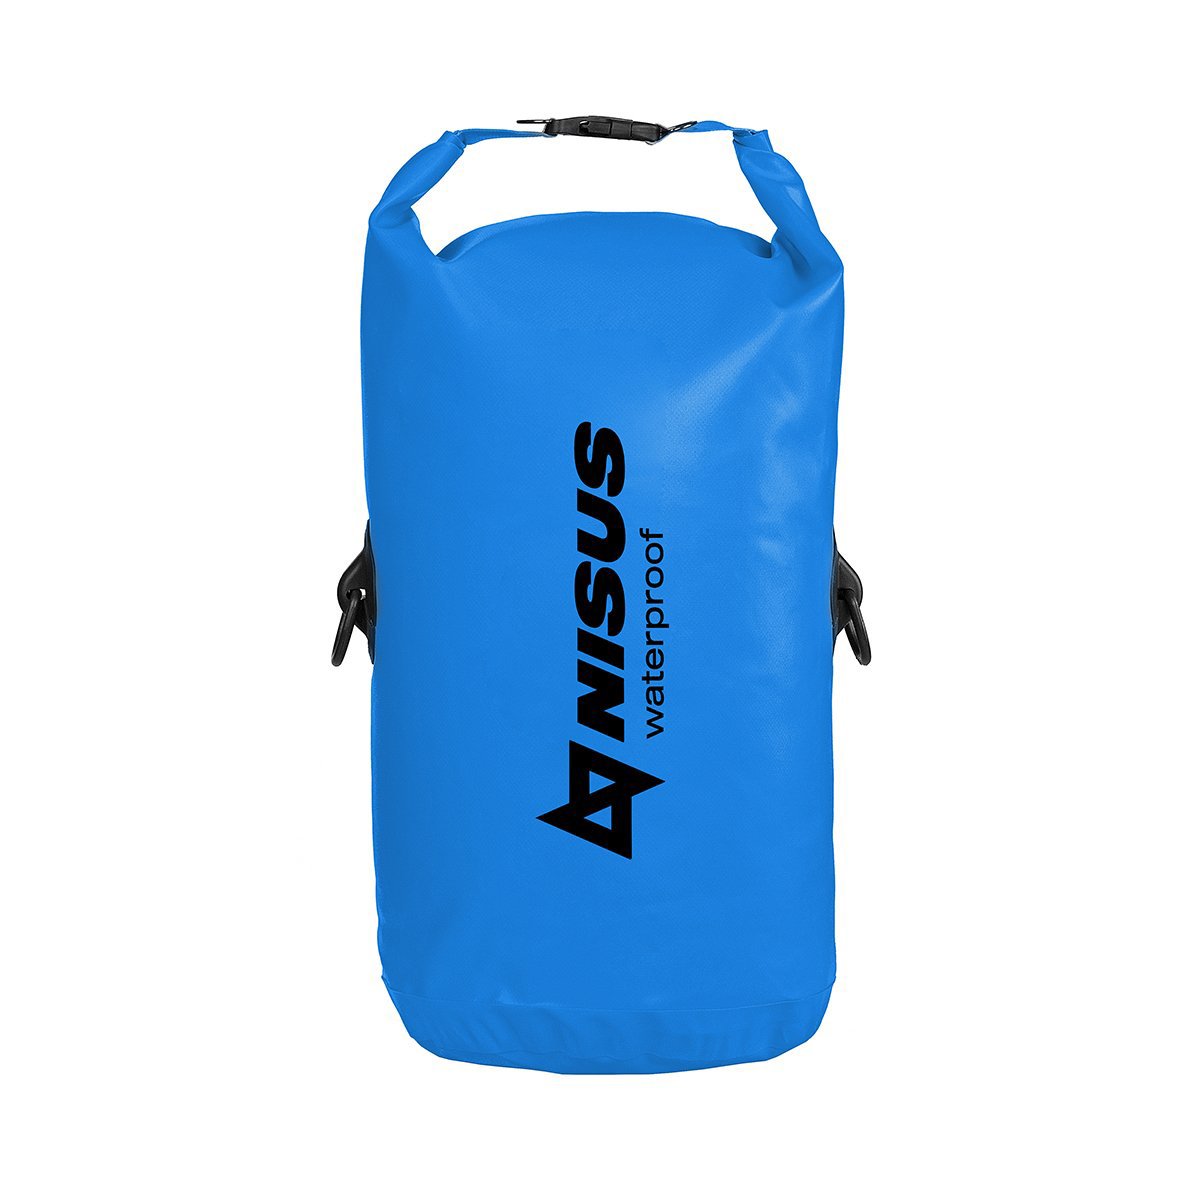 15 L Small Portable Waterproof Dry Bag, Blue